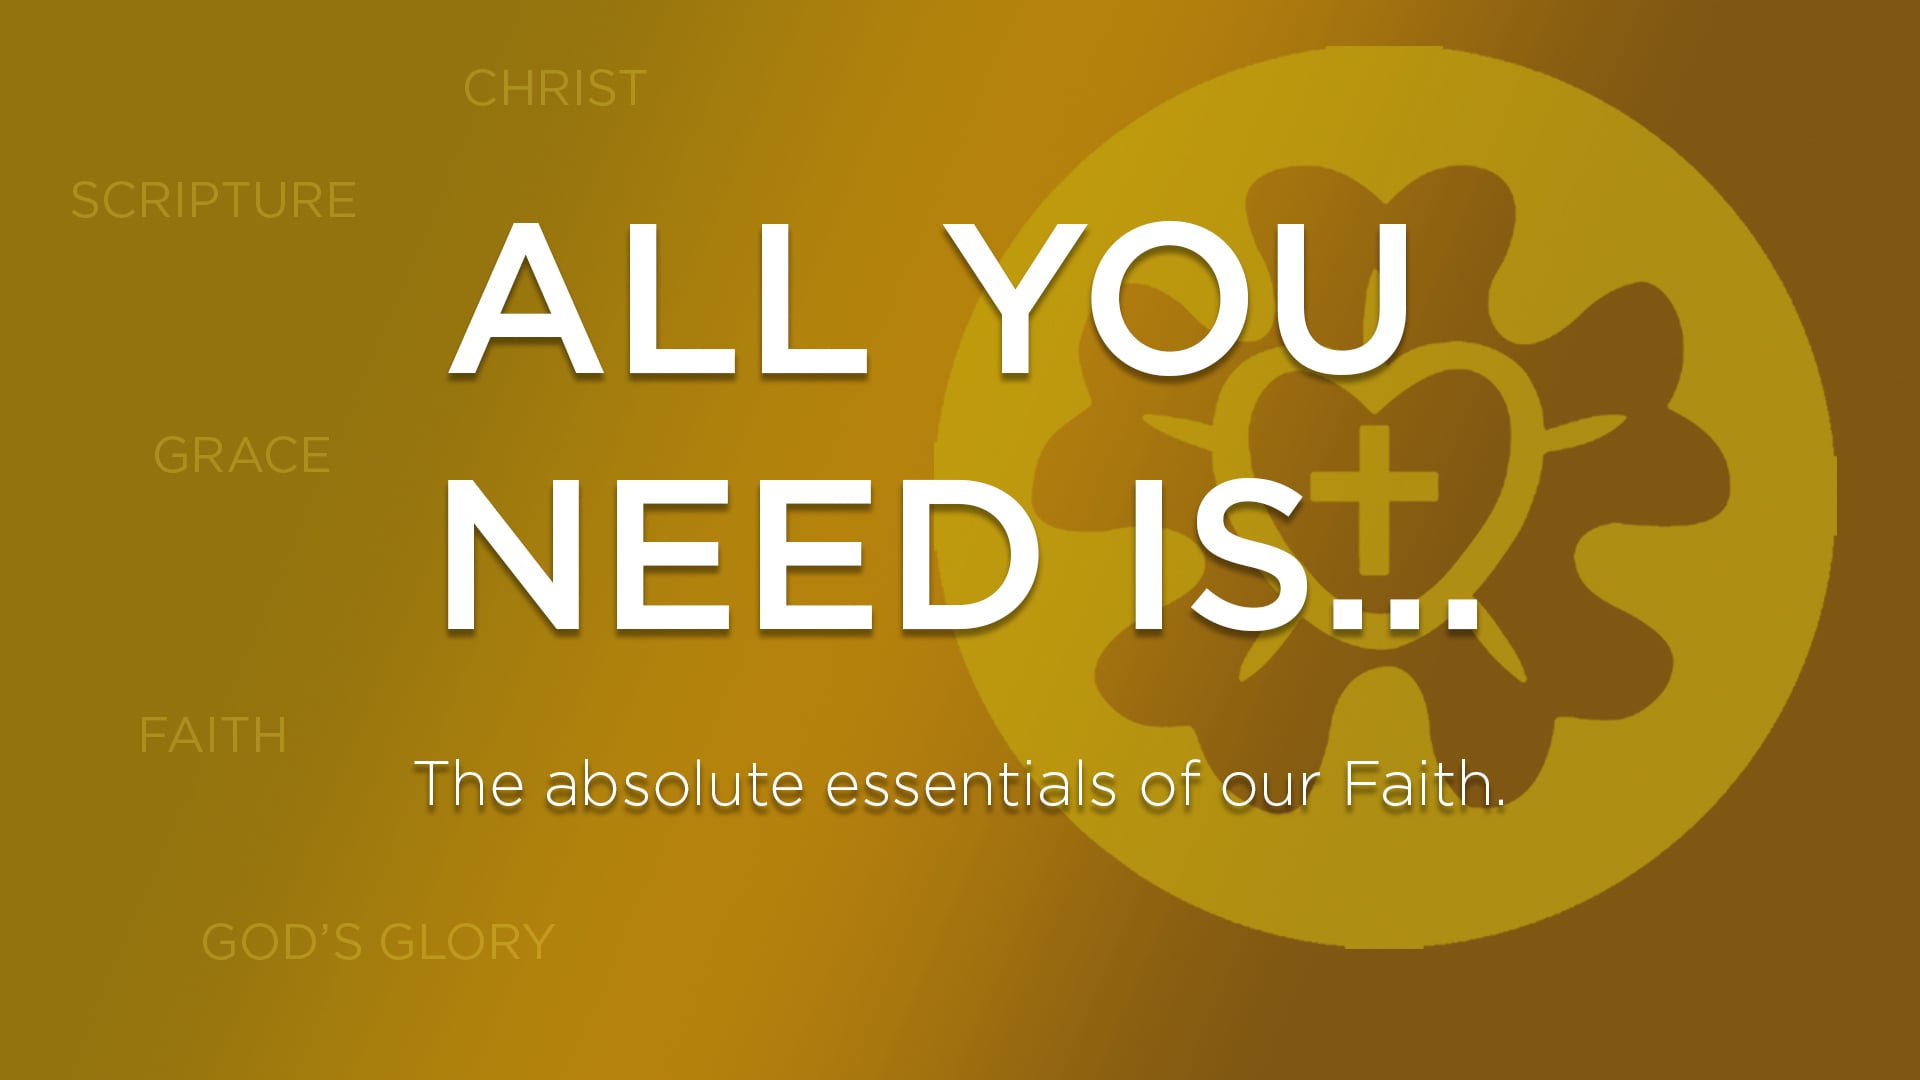 All You Need Is - God's Glory